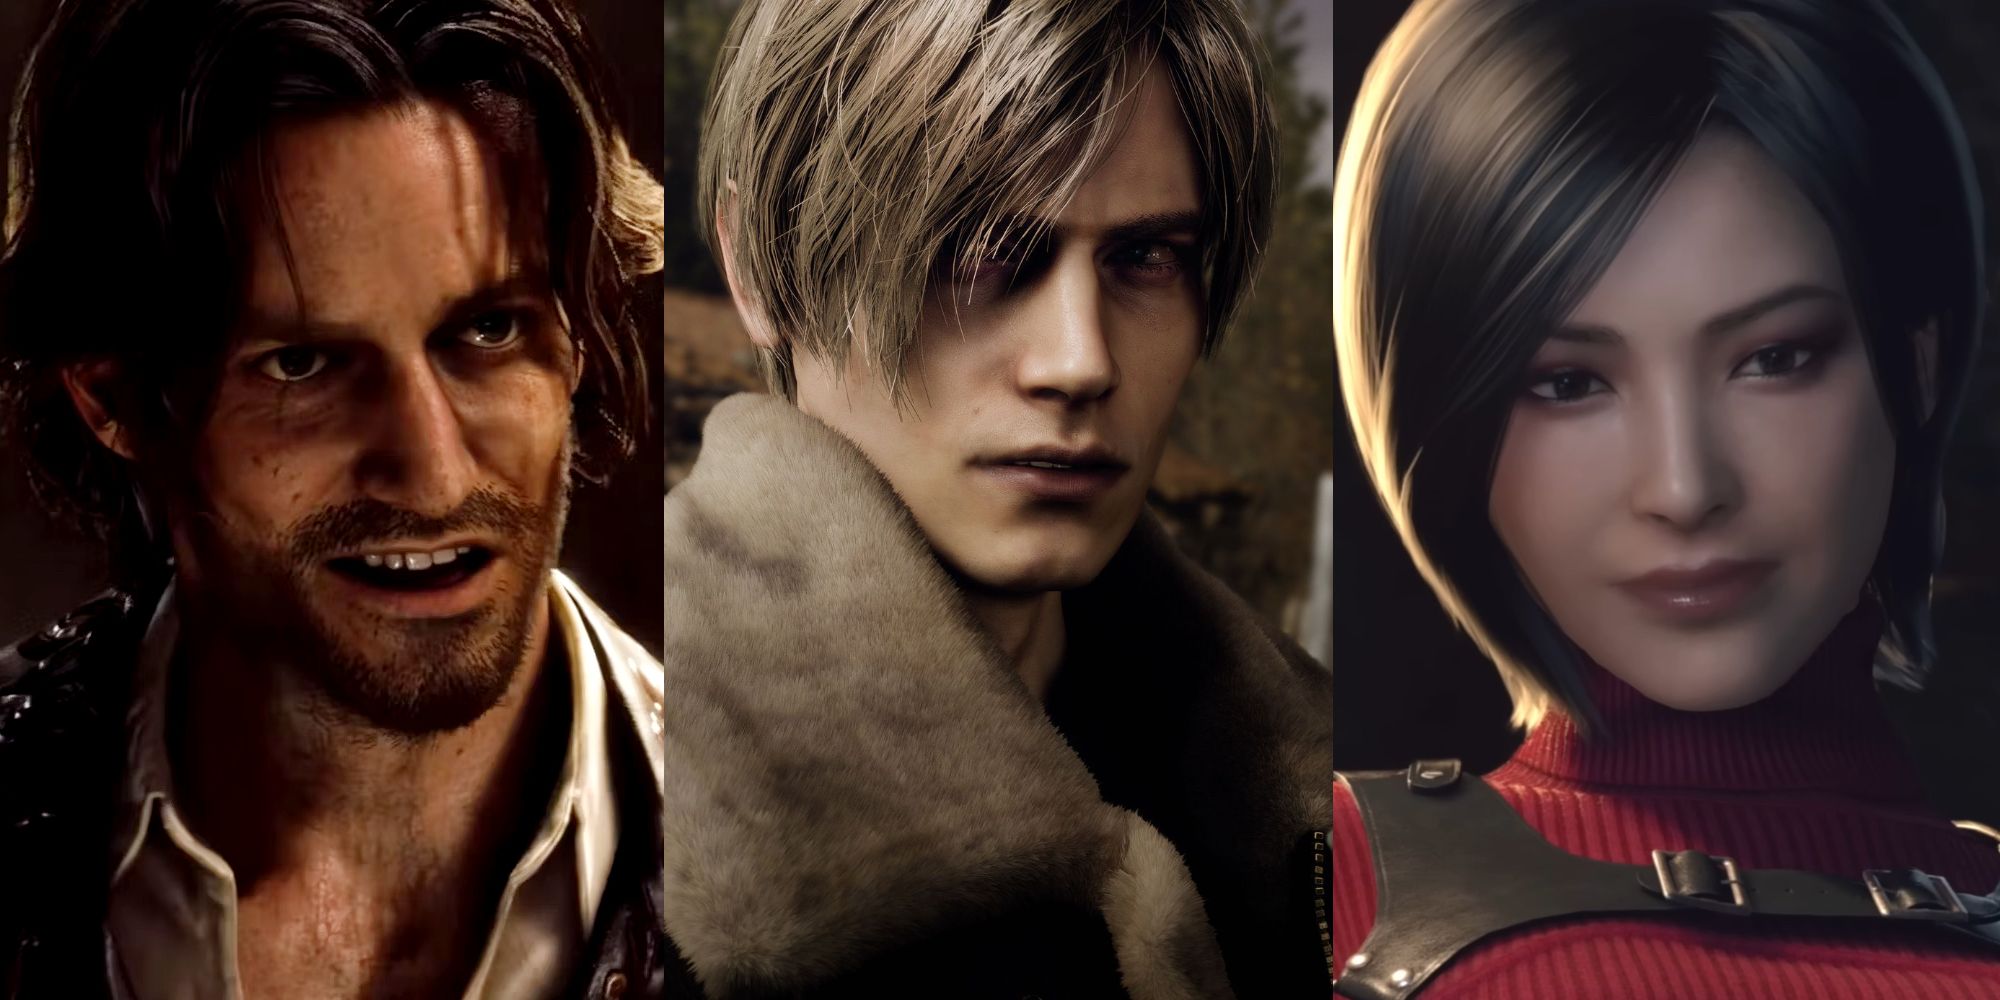 A vertically split image showing close-ups of three Resident Evil 4 characters in the remake - Luis, Leon, and Ada.